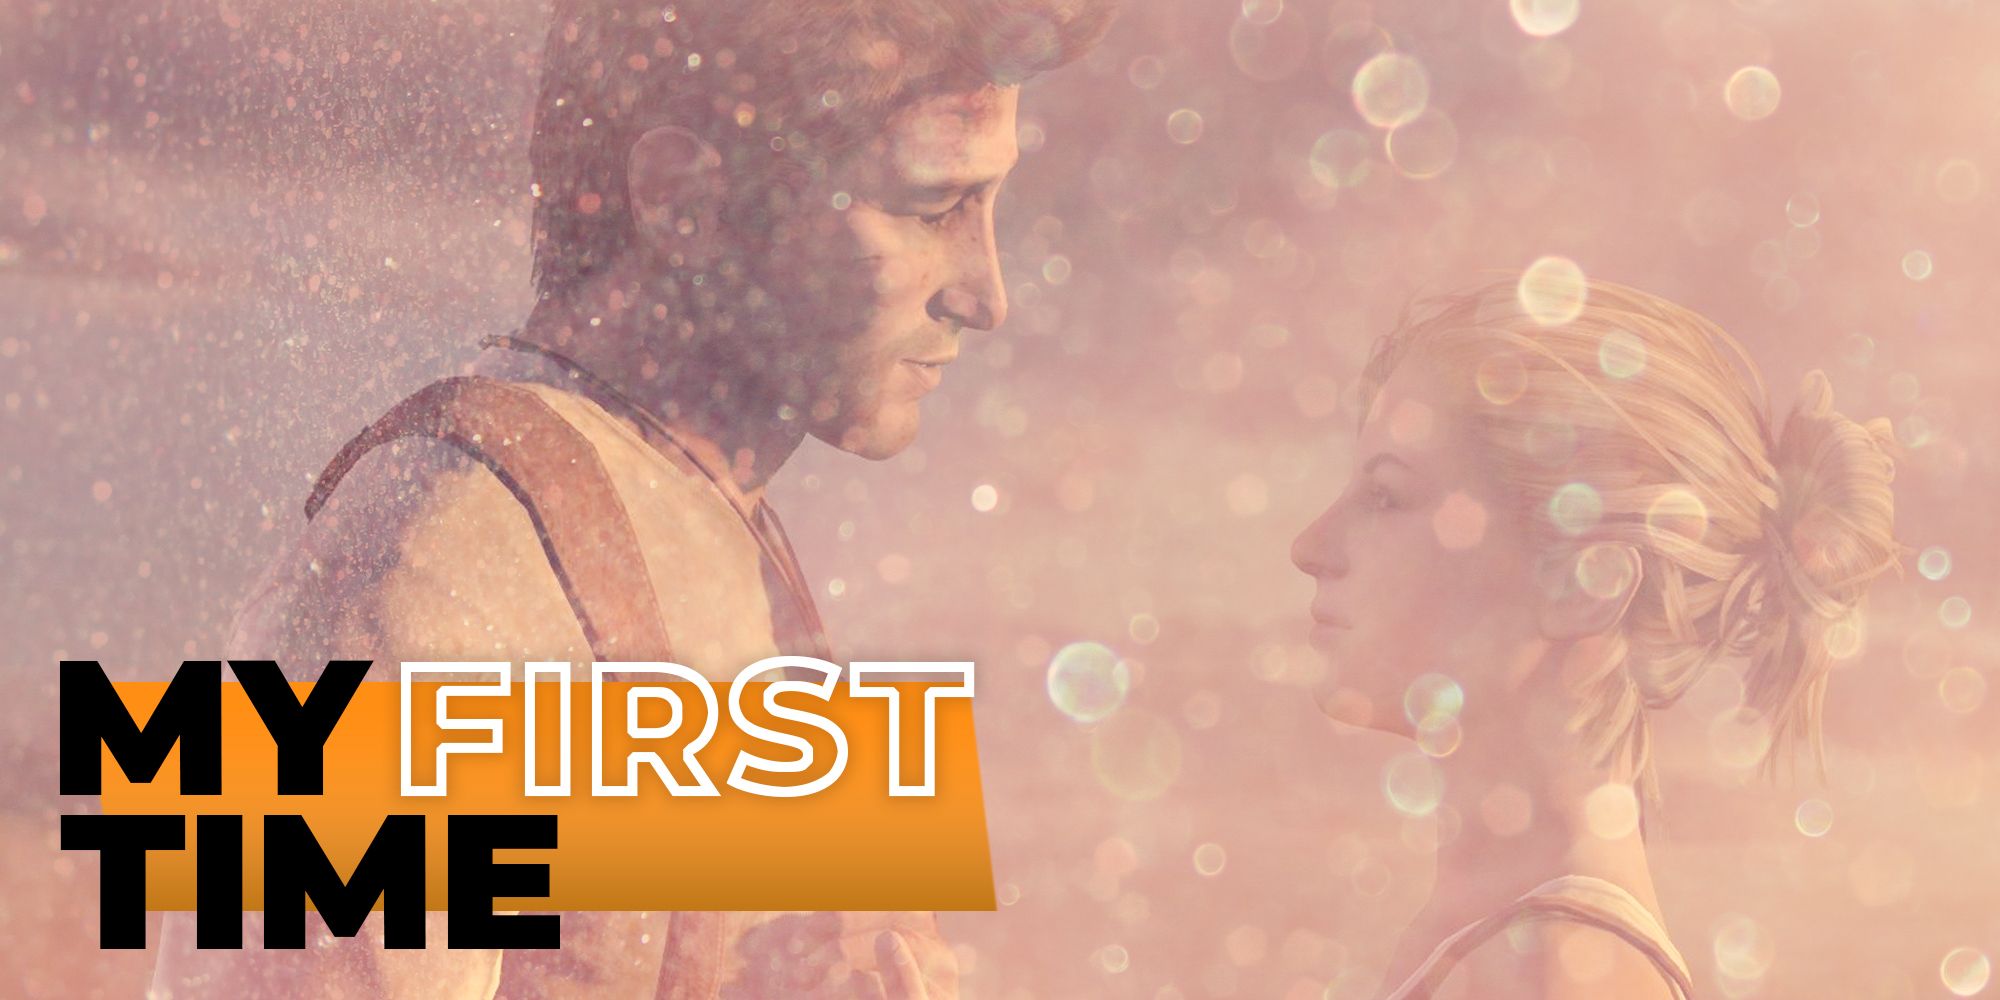 Nathan Drake and Elena face-to-face with a retro filter and the words 